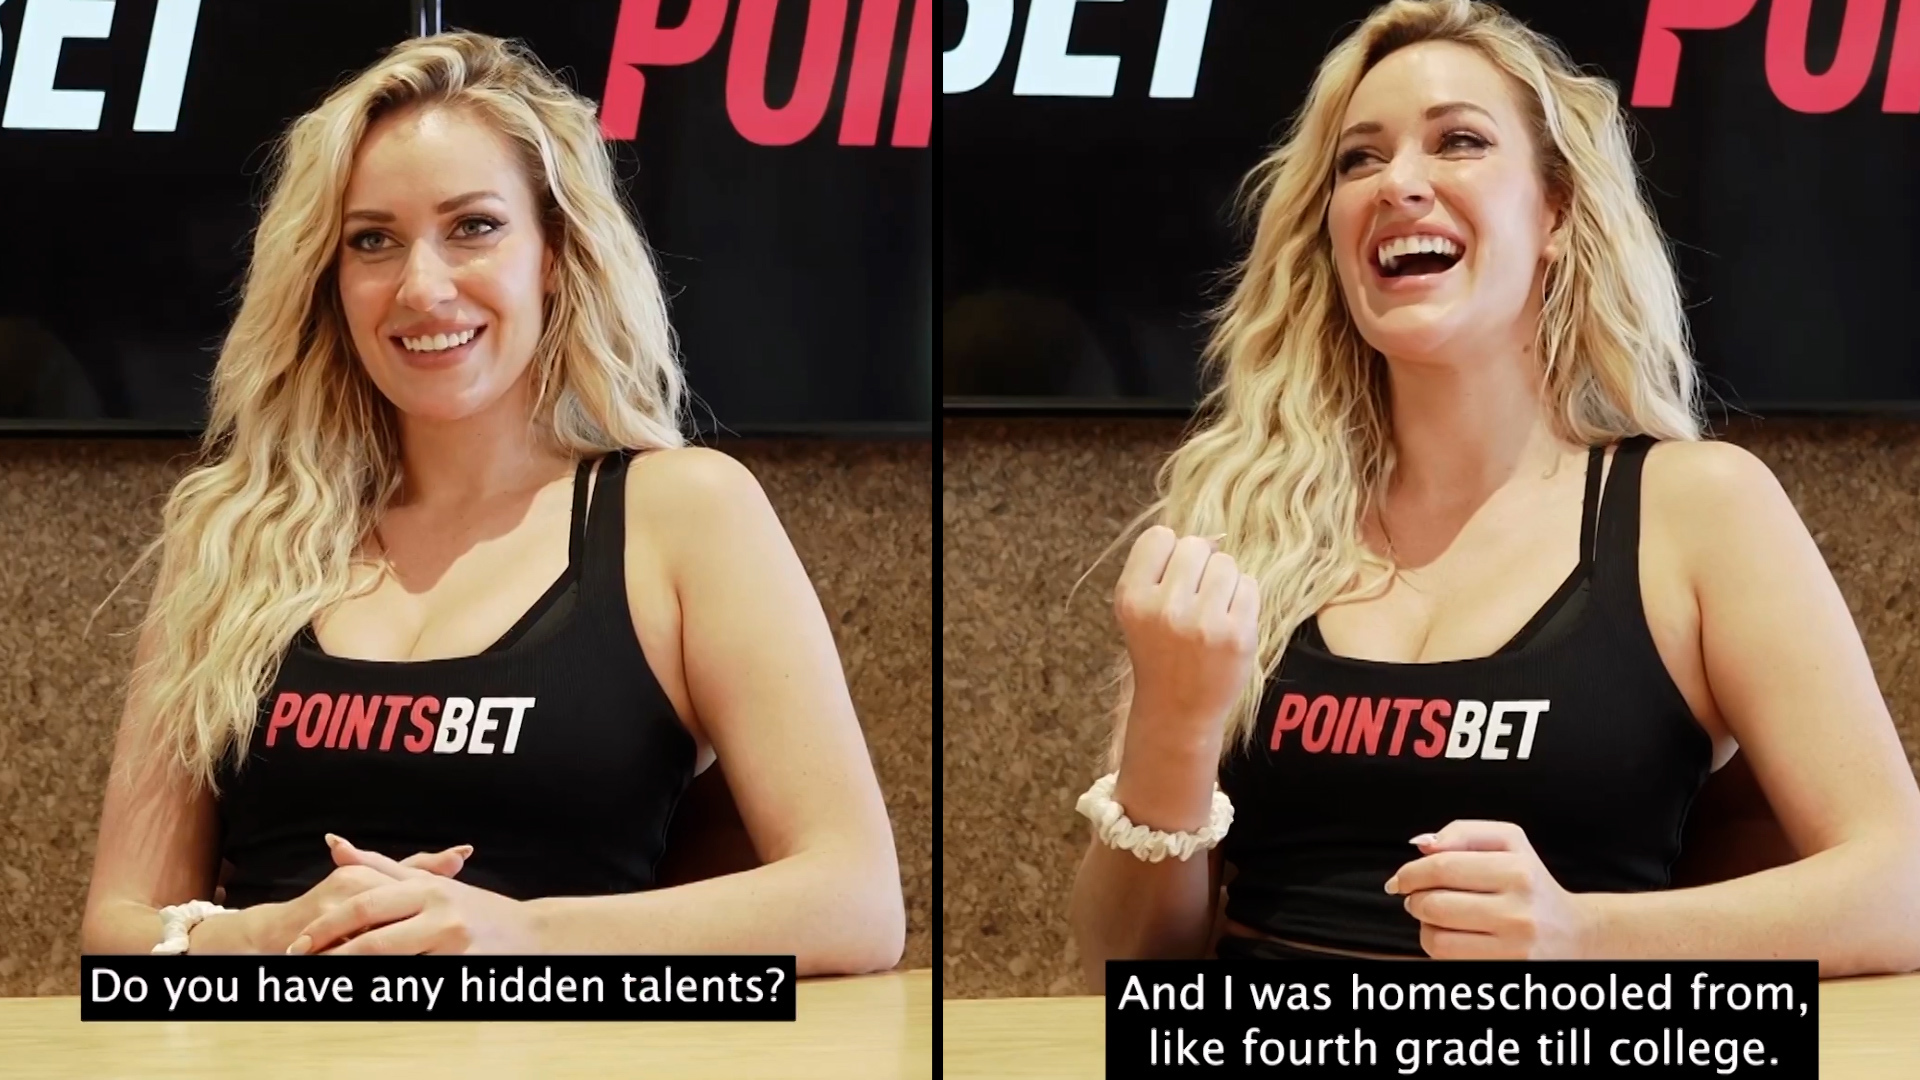 Paige Spiranac reveals her hidden talent: "I can fit my whole fist in my mouth"